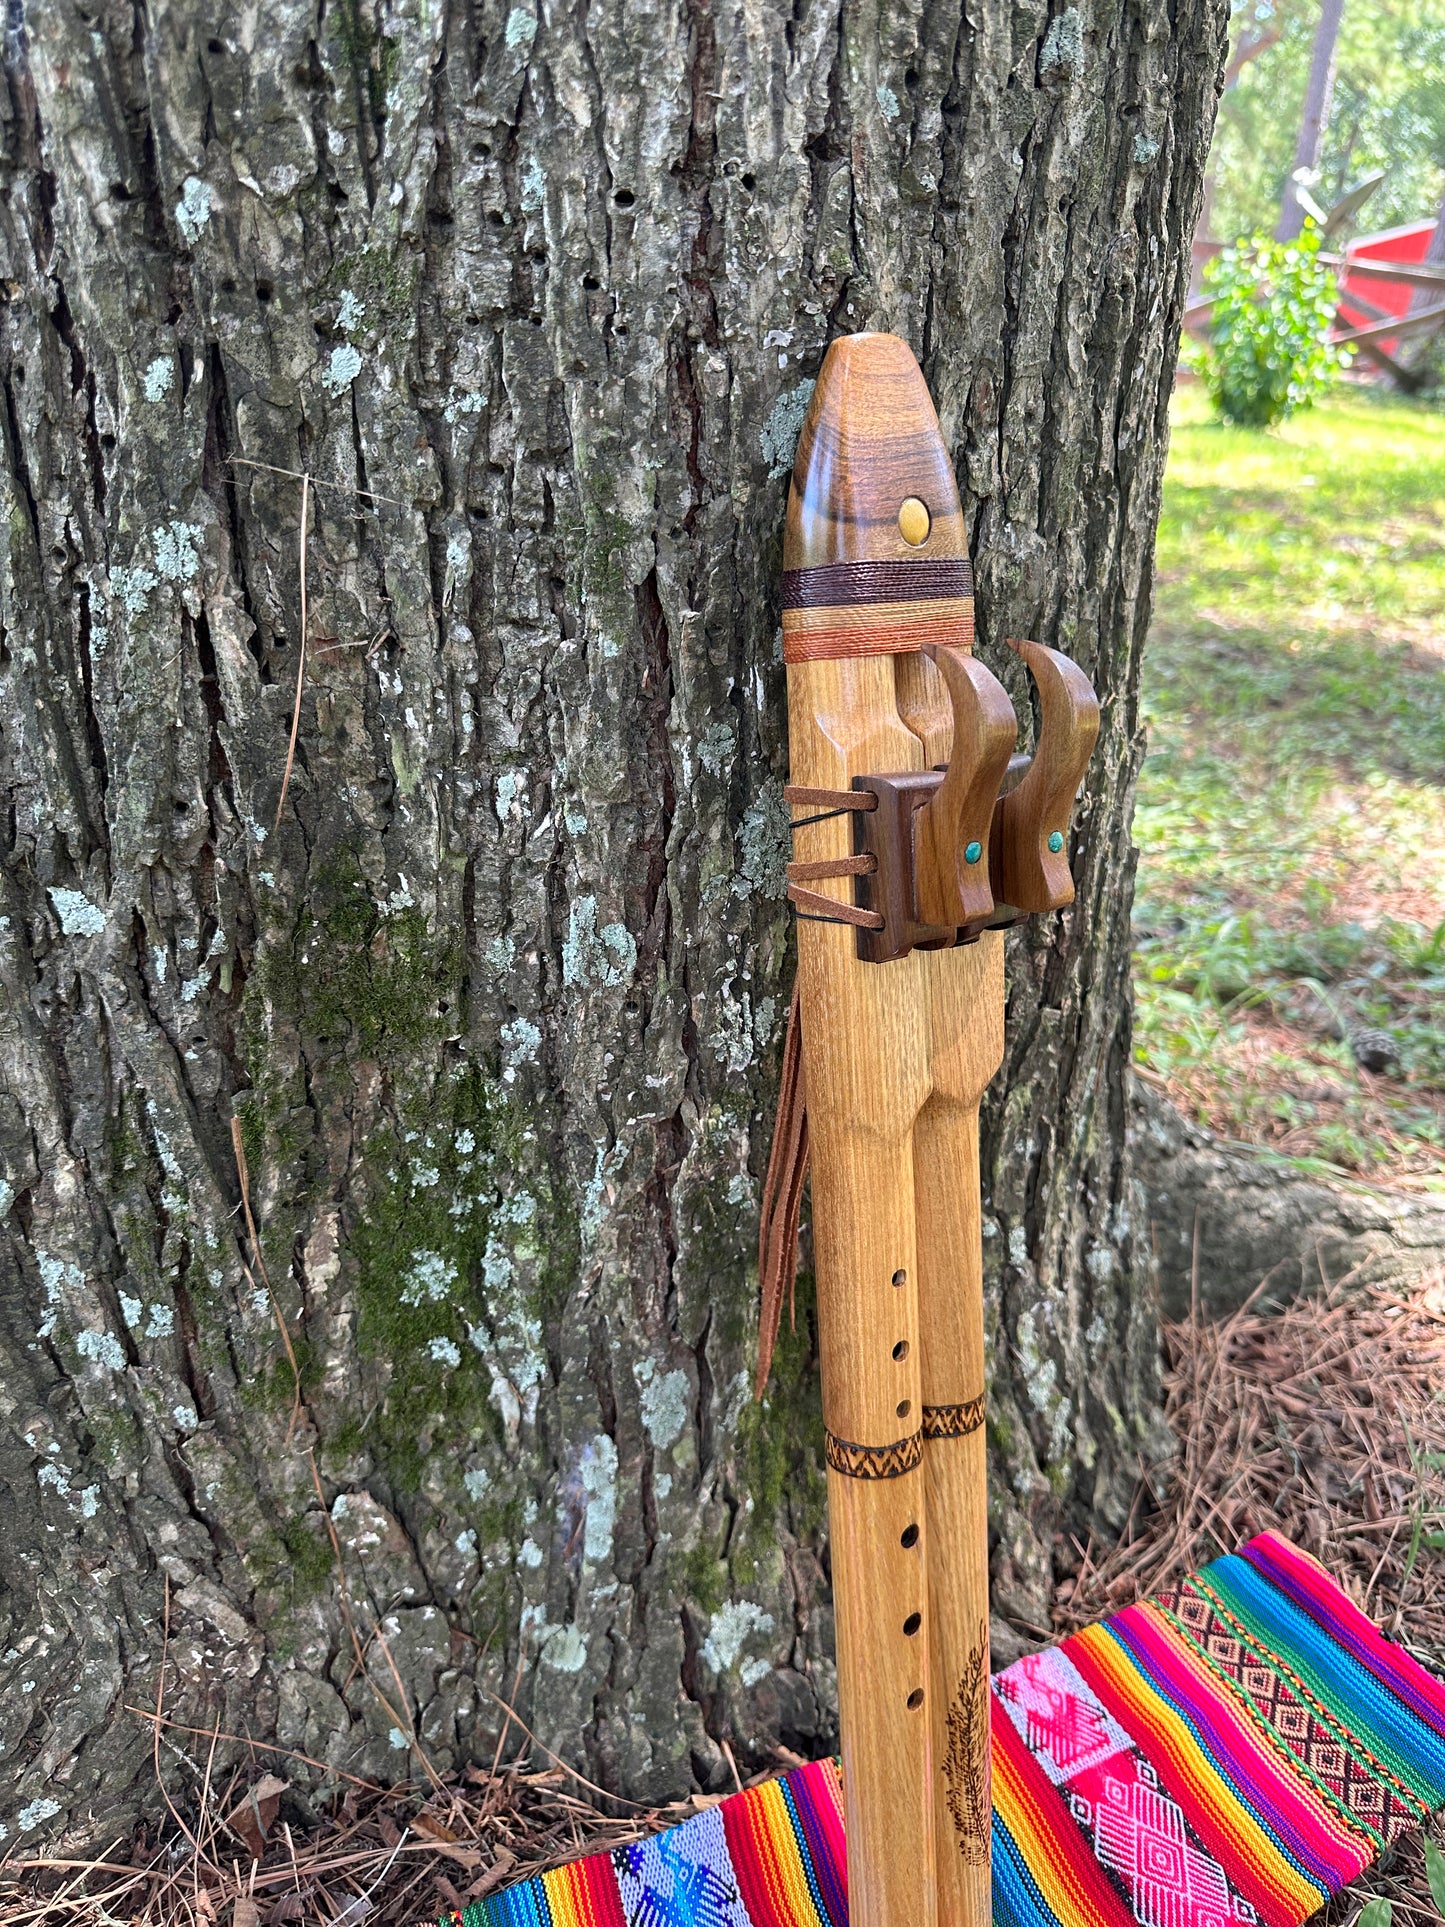 Cherry Wood Native American Style Drone Flute - Made to Order in Am, G, F or F#